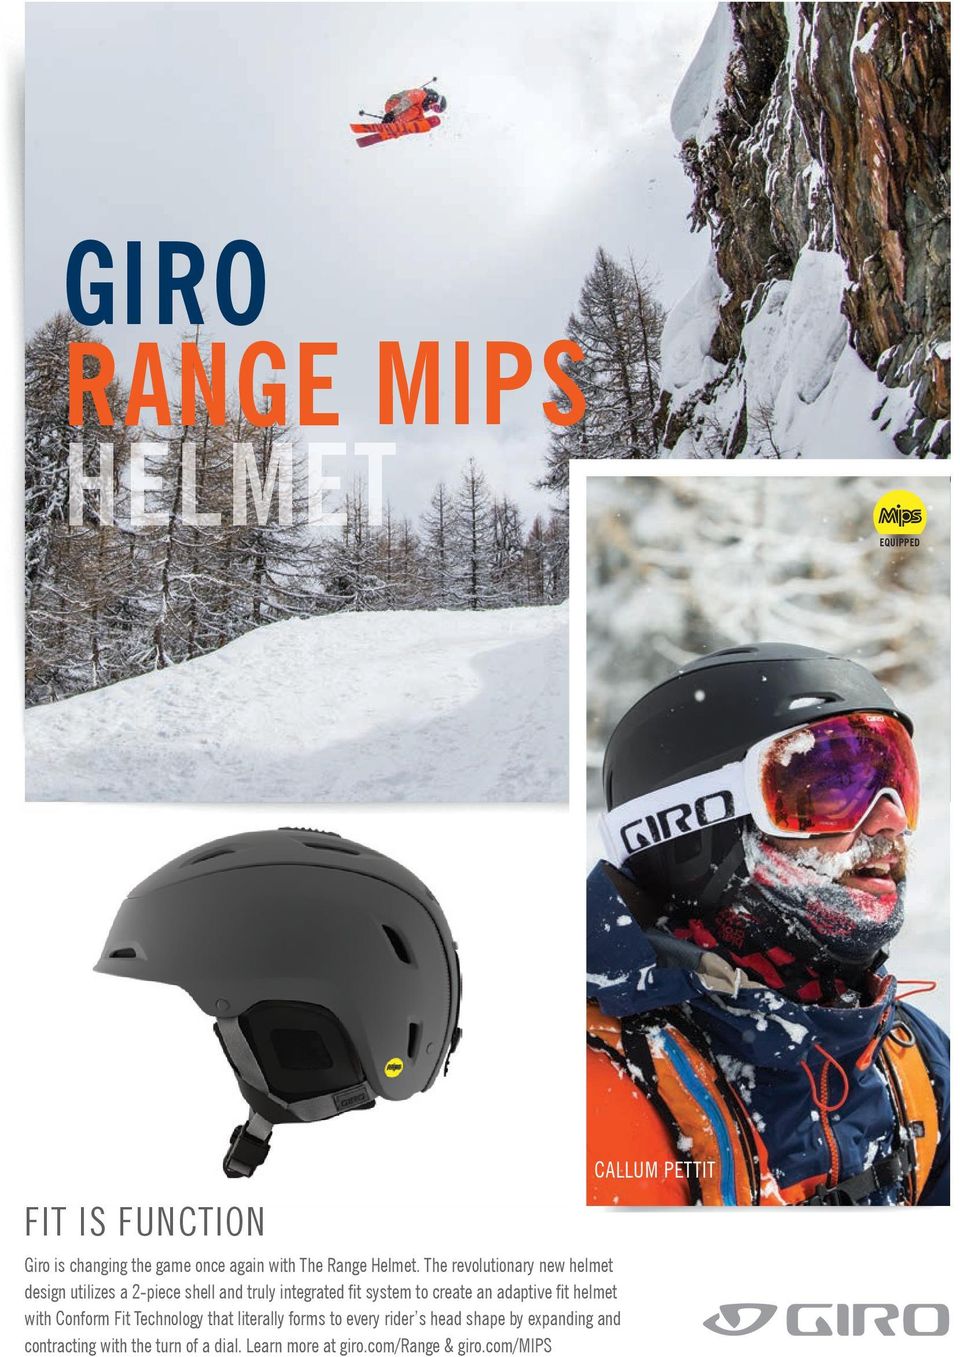 shape by expanding and contracting with the turn of a dial. Learn more at giro.com/range & giro.com/mips CALLUM PETTIT Giro is changing the game once again with The Range Helmet.